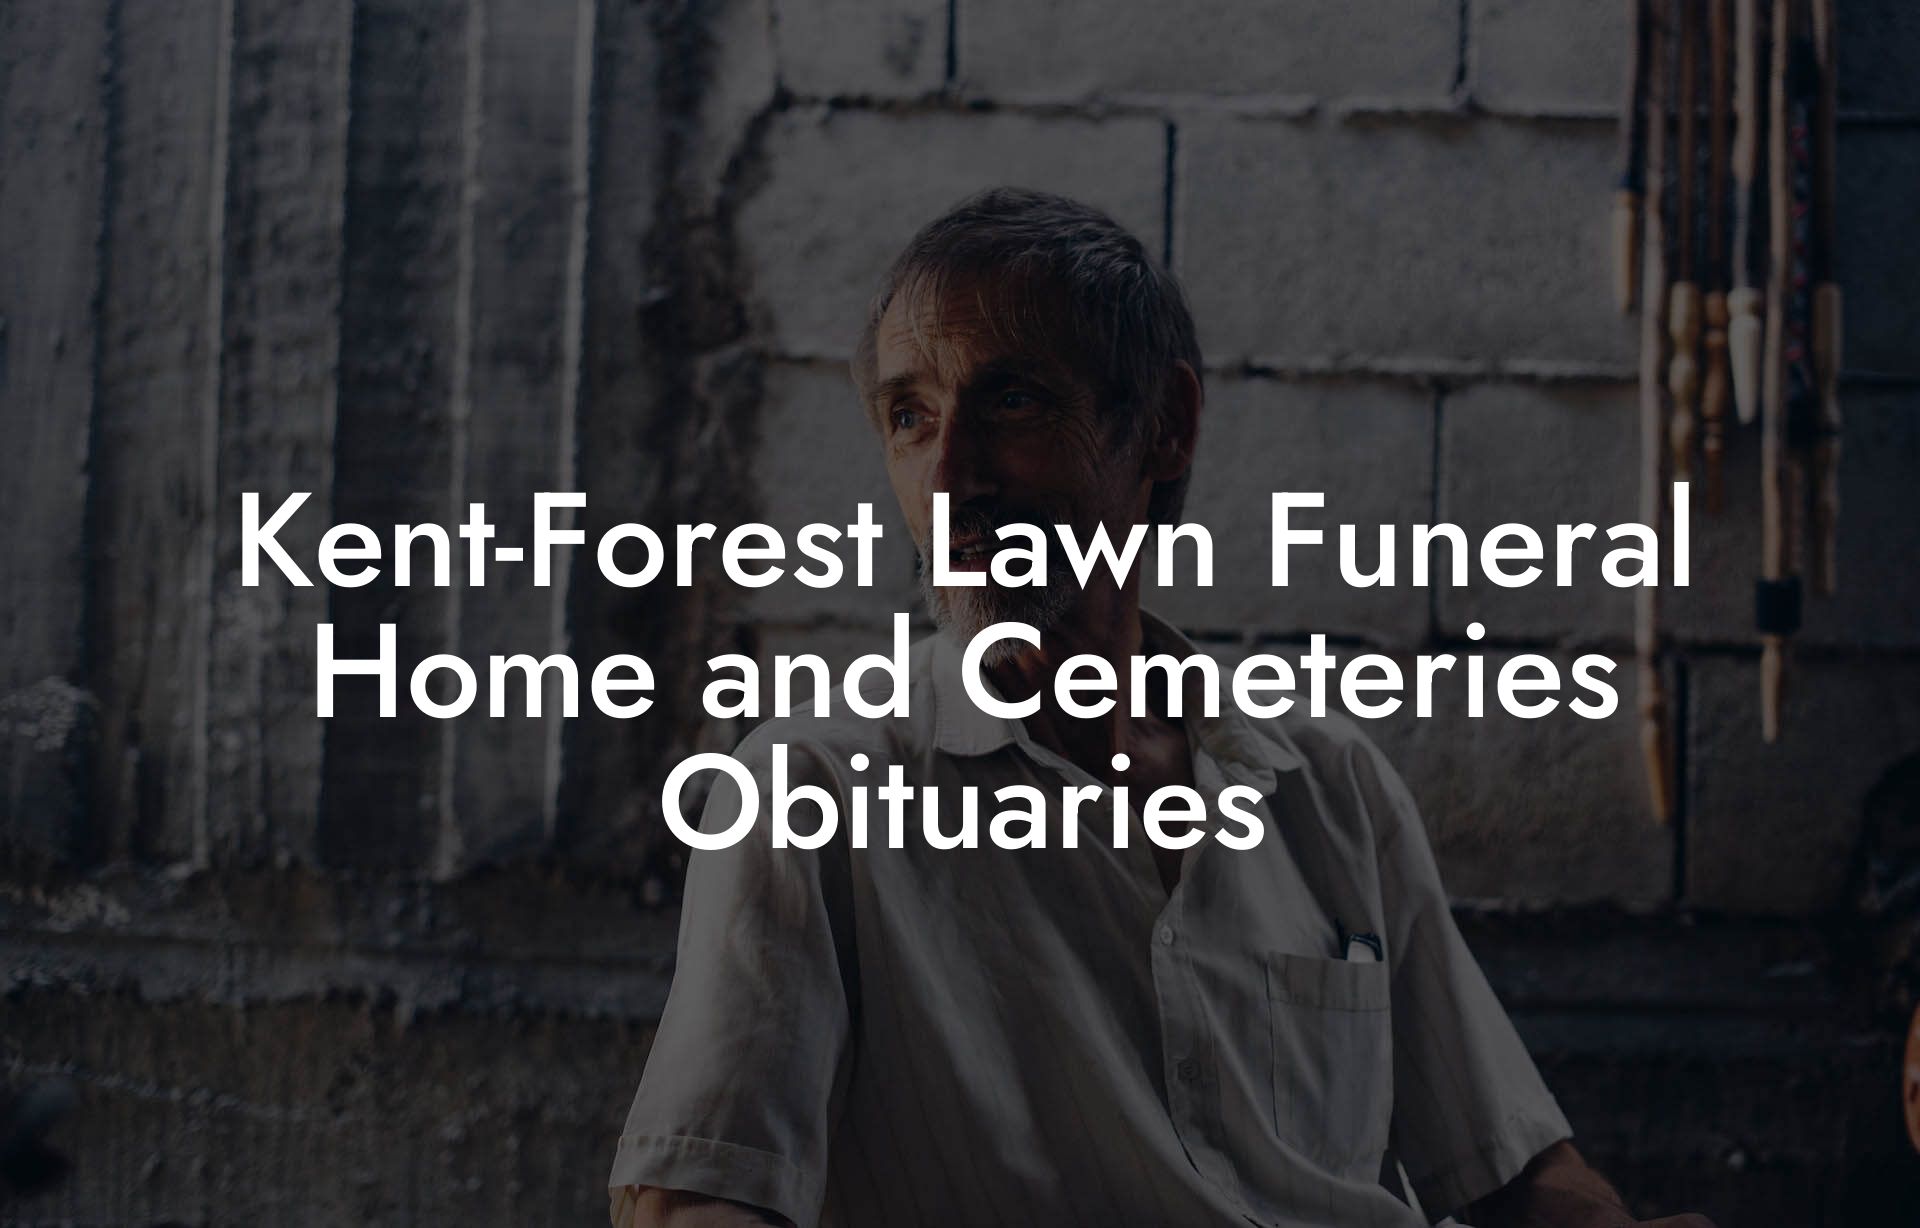 Kent-Forest Lawn Funeral Home and Cemeteries Obituaries